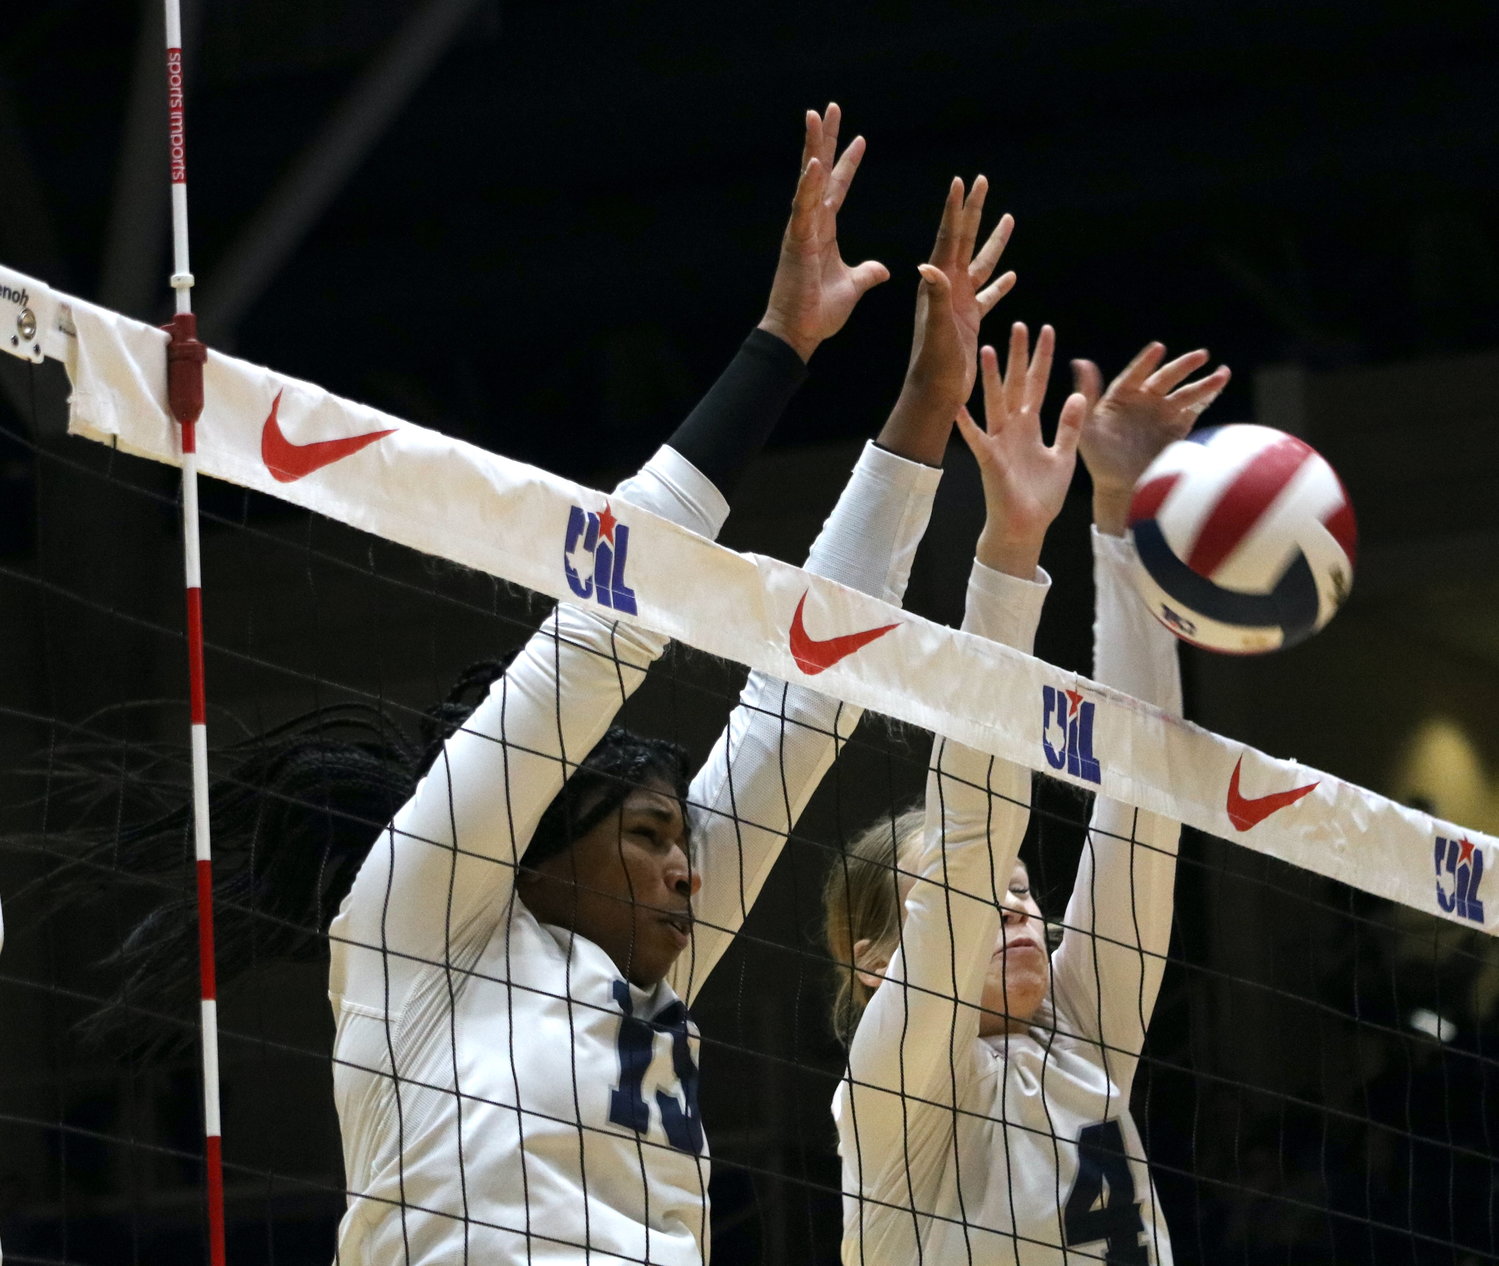 Tendai Titley and Callie Funk block a kill attempt during Friday's Class 6A State Semifinal between Tompkins and Keller on Friday at the Curtis Culwell Center in Garland.